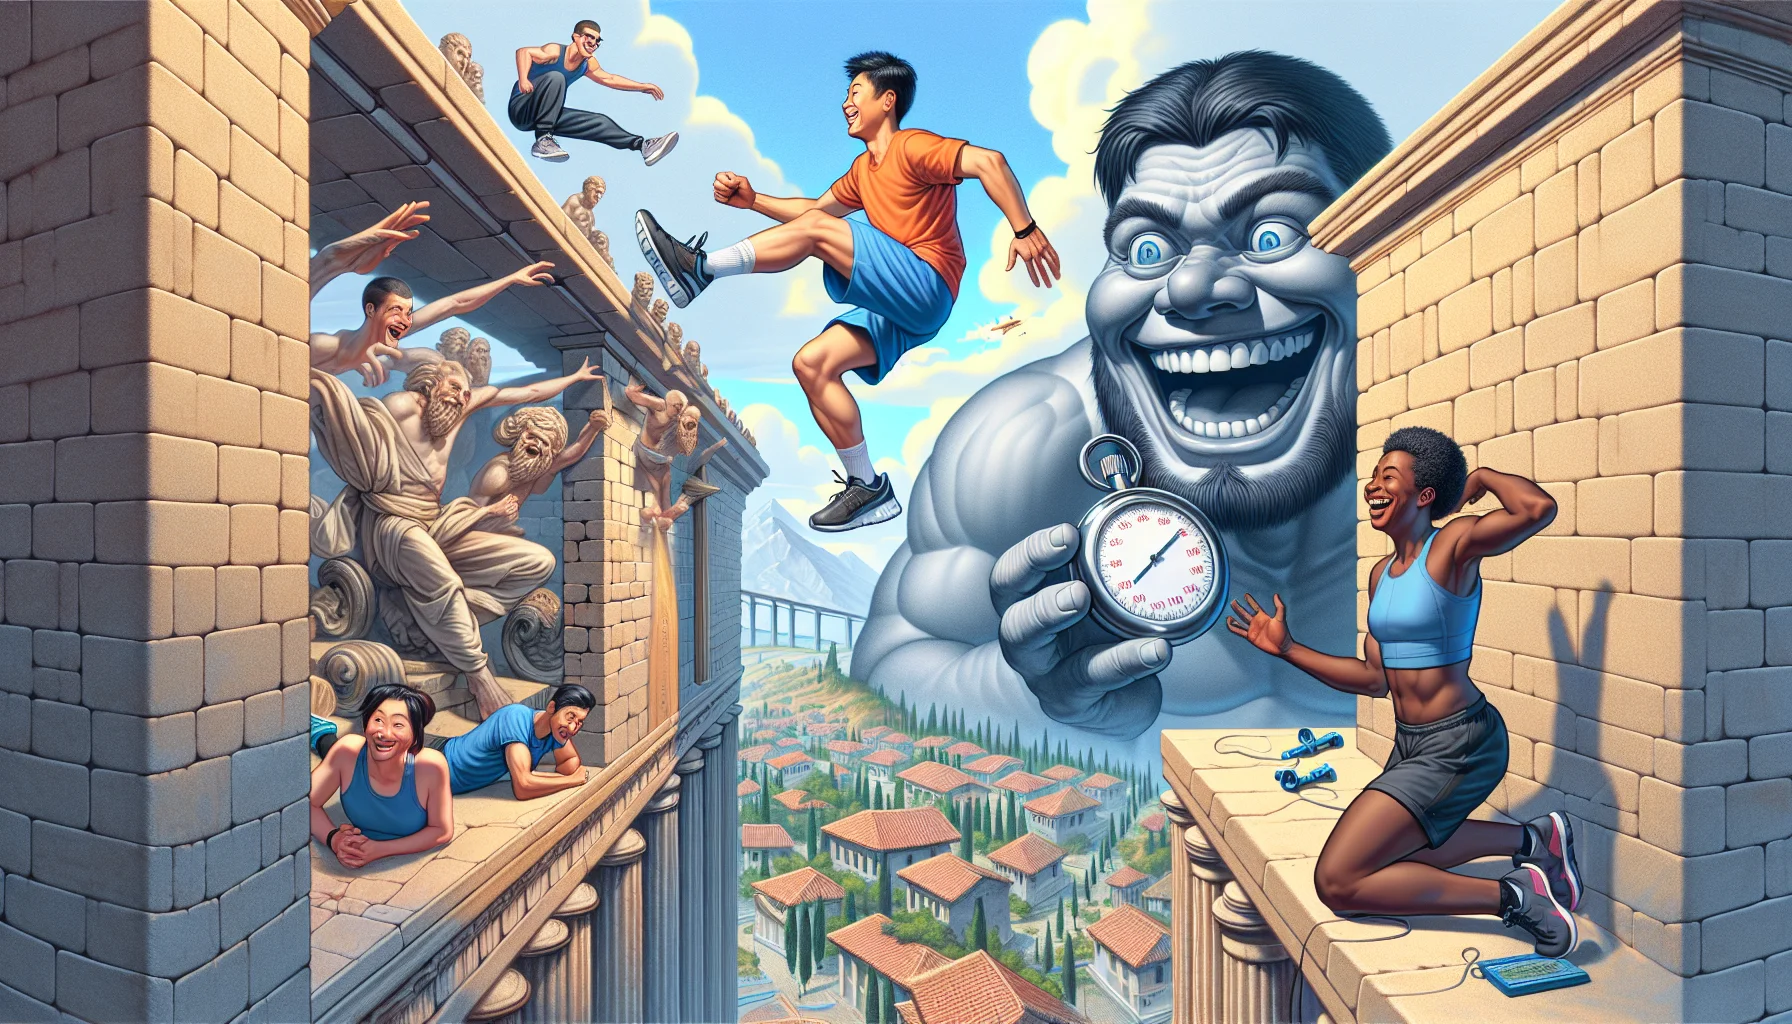 Generate a comical image depicting a fantastical parkour scenario. In this scene, an East Asian male daredevil, transitioning from a wall run to a backflip above a yawning chasm. At the other end of the gap, a Black female athlete laughs cheerfully, preparing to initiate her jump. In the background, a giant, amused Cyclops watches them, holding an oversized stopwatch. This surreal parkour competition is happening in the heart of a bustling, mythical city that combines elements of ancient Greek architecture with modern parkour playground elements. This humorous picture encourages physical fitness and adventure.